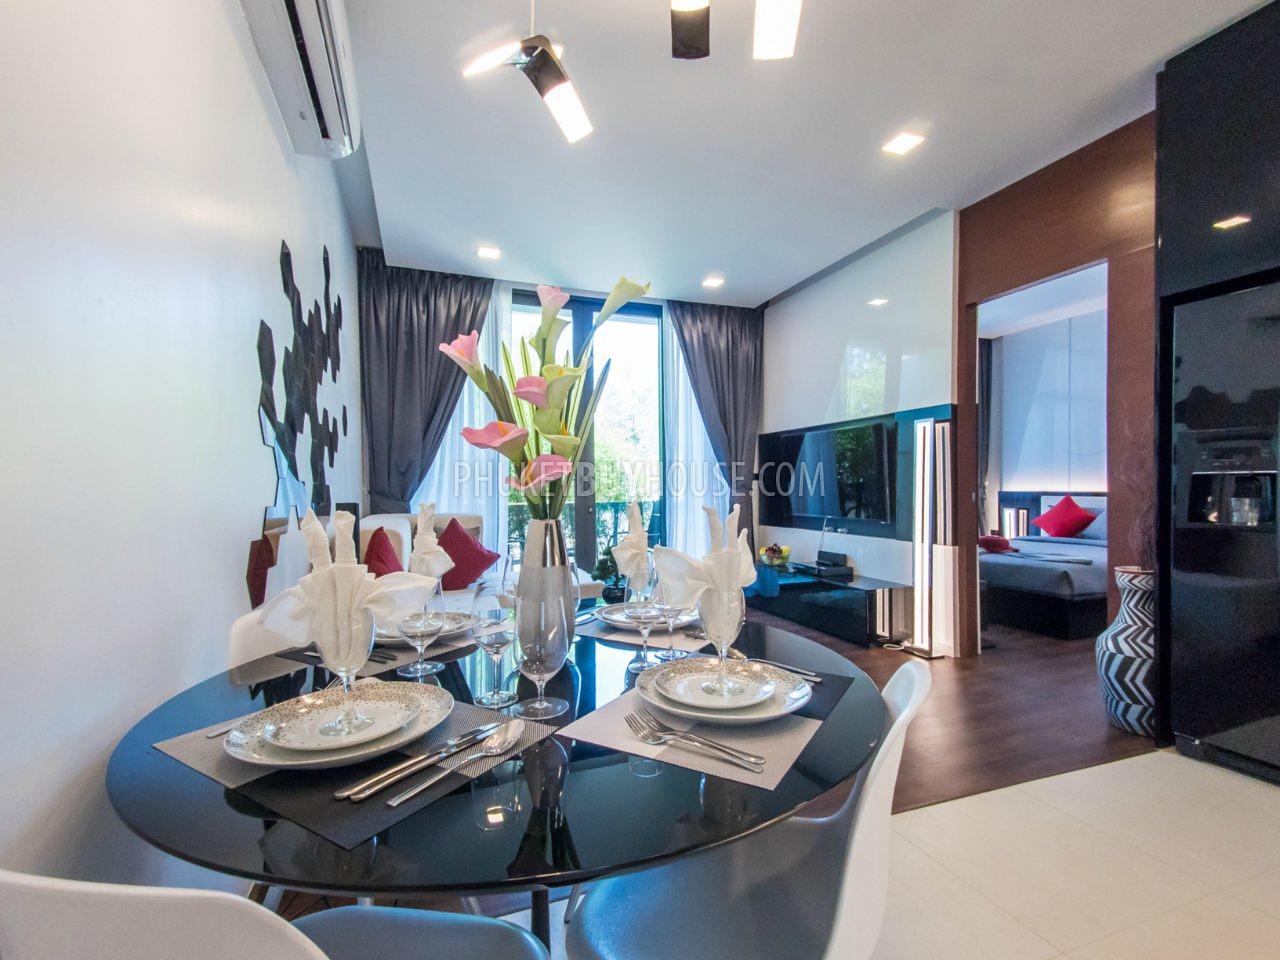 BAN5753: Spectacular 2-Bedroom Apartment in a premium location in Bang Tao Beach. Photo #12